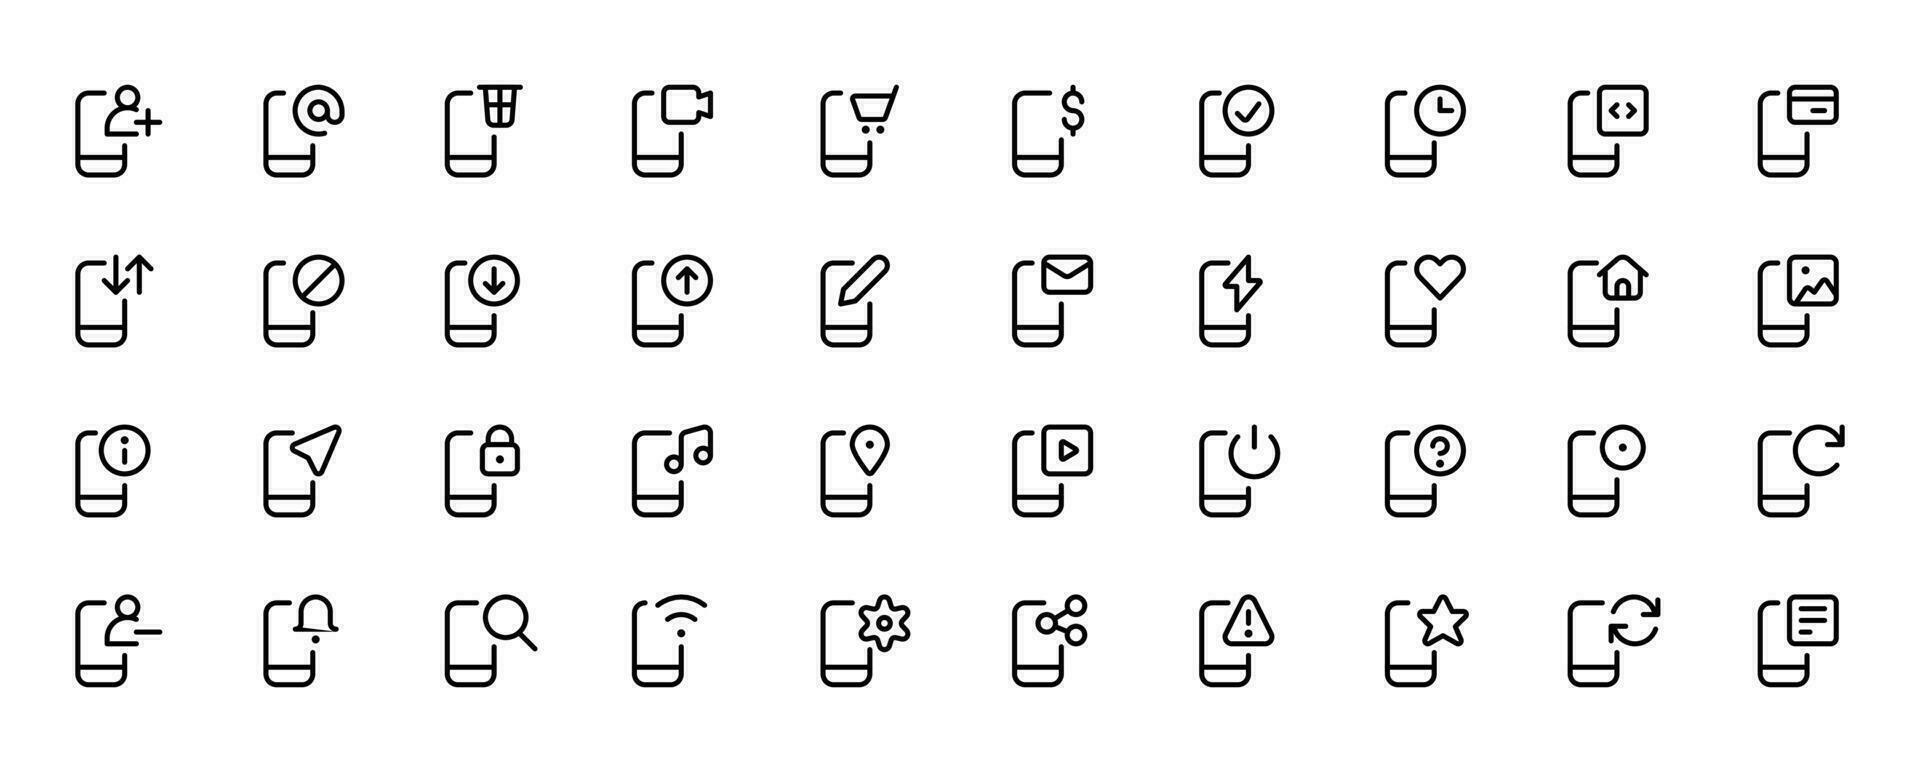 Mobile Phone Function icons. Smartphone technology Modern ui ux Kit - Shopping and ecommerce, Set of shopping bag, buy cart, delivery, payment, contact us, map location, user, arrows, ui ux icons vector